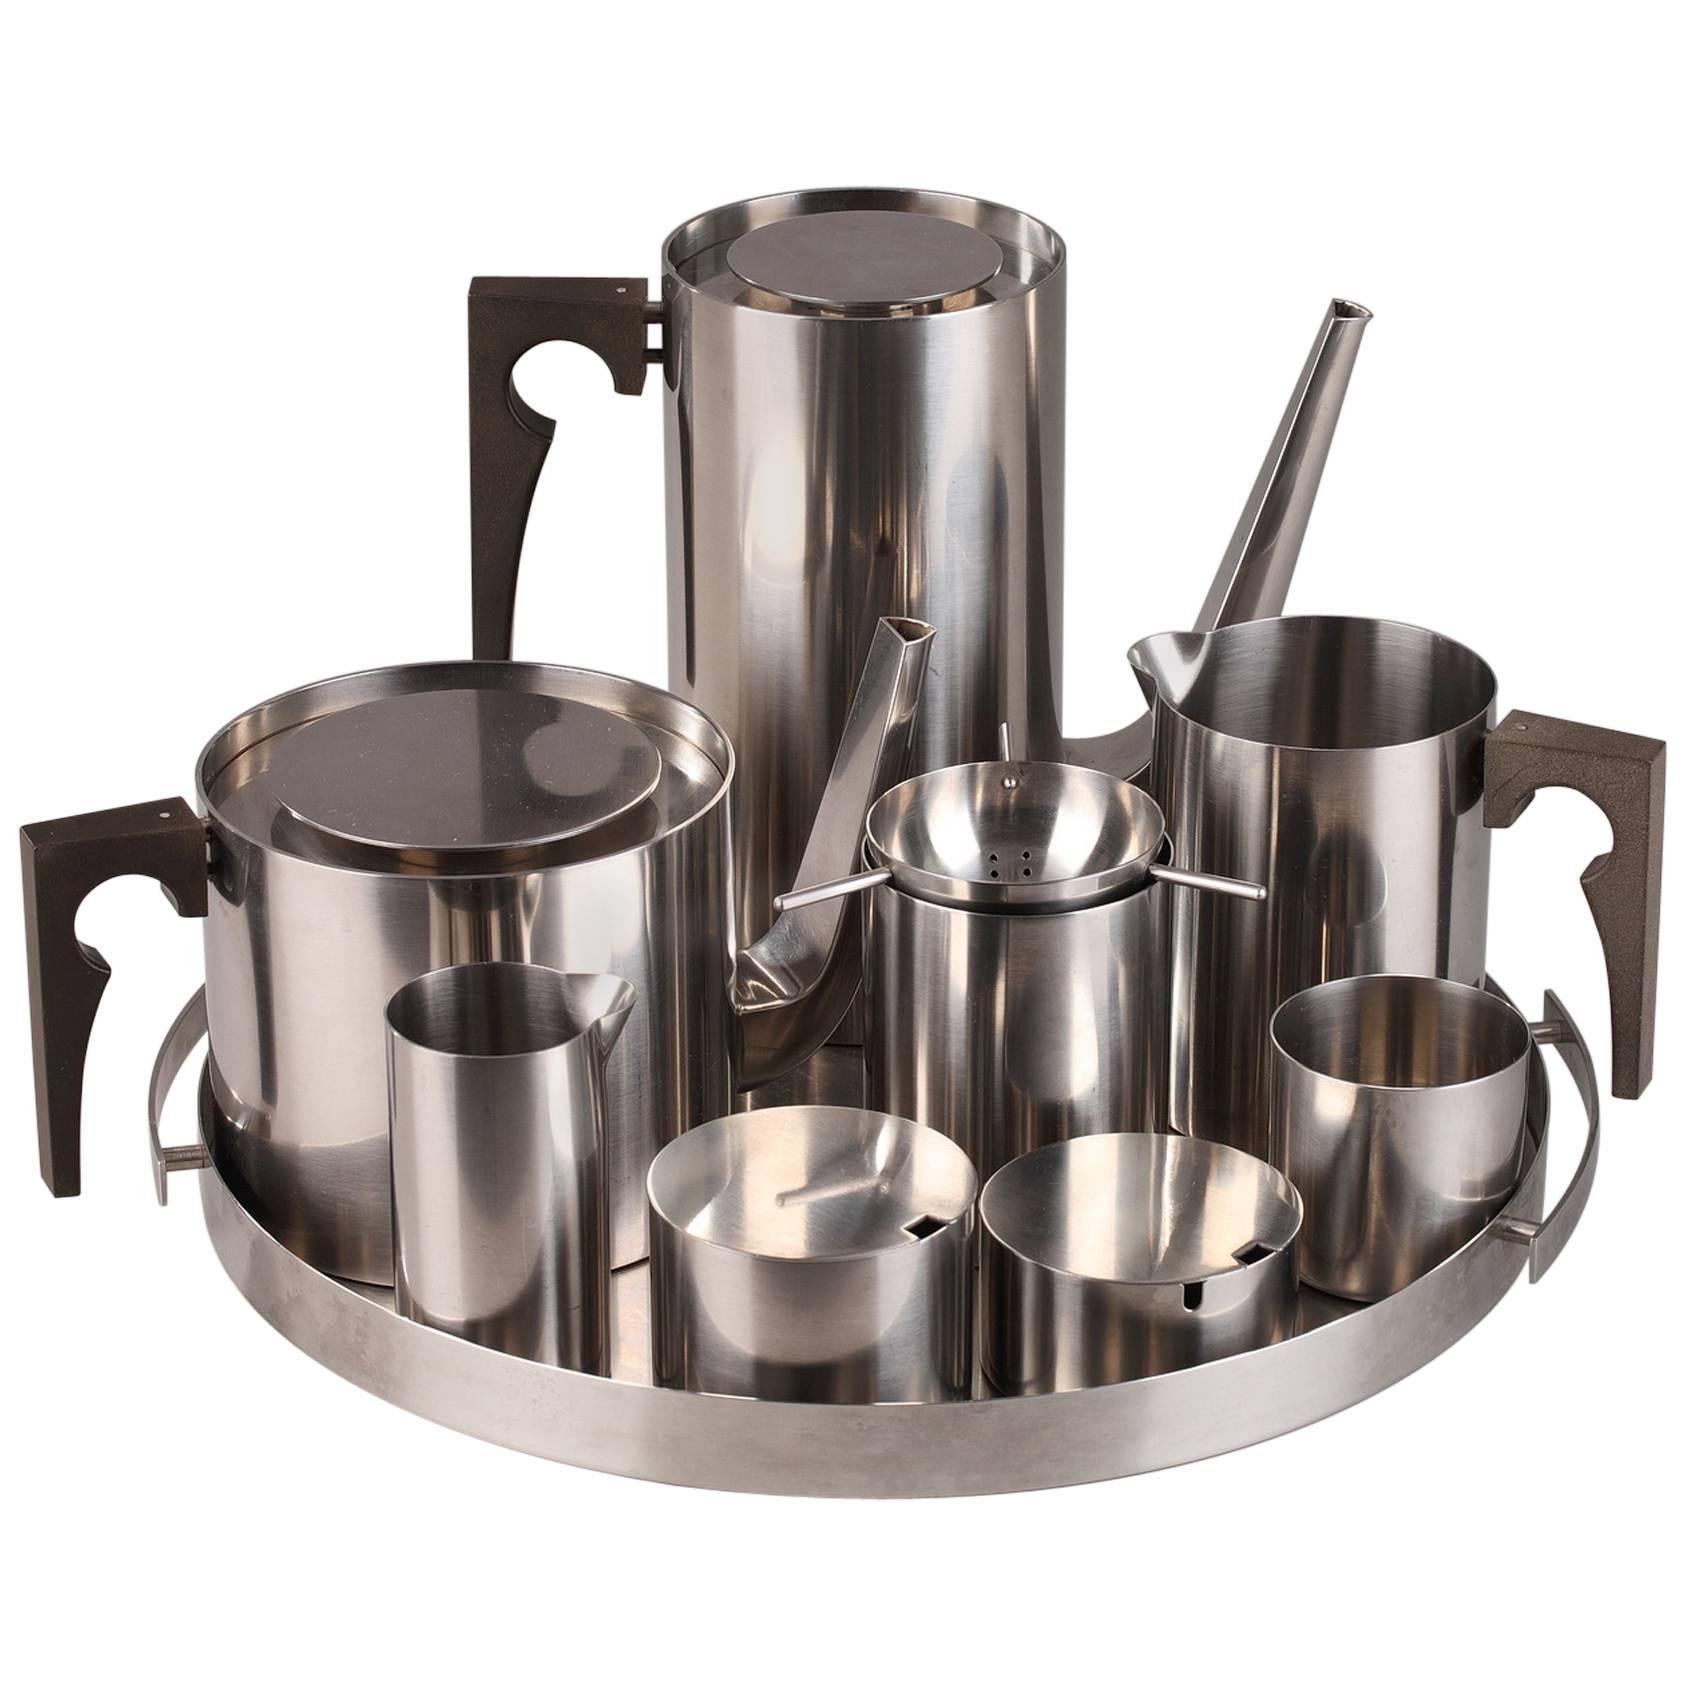 Arne Jacobsen Stainless Steel Coffee and Tea Service by Stelton